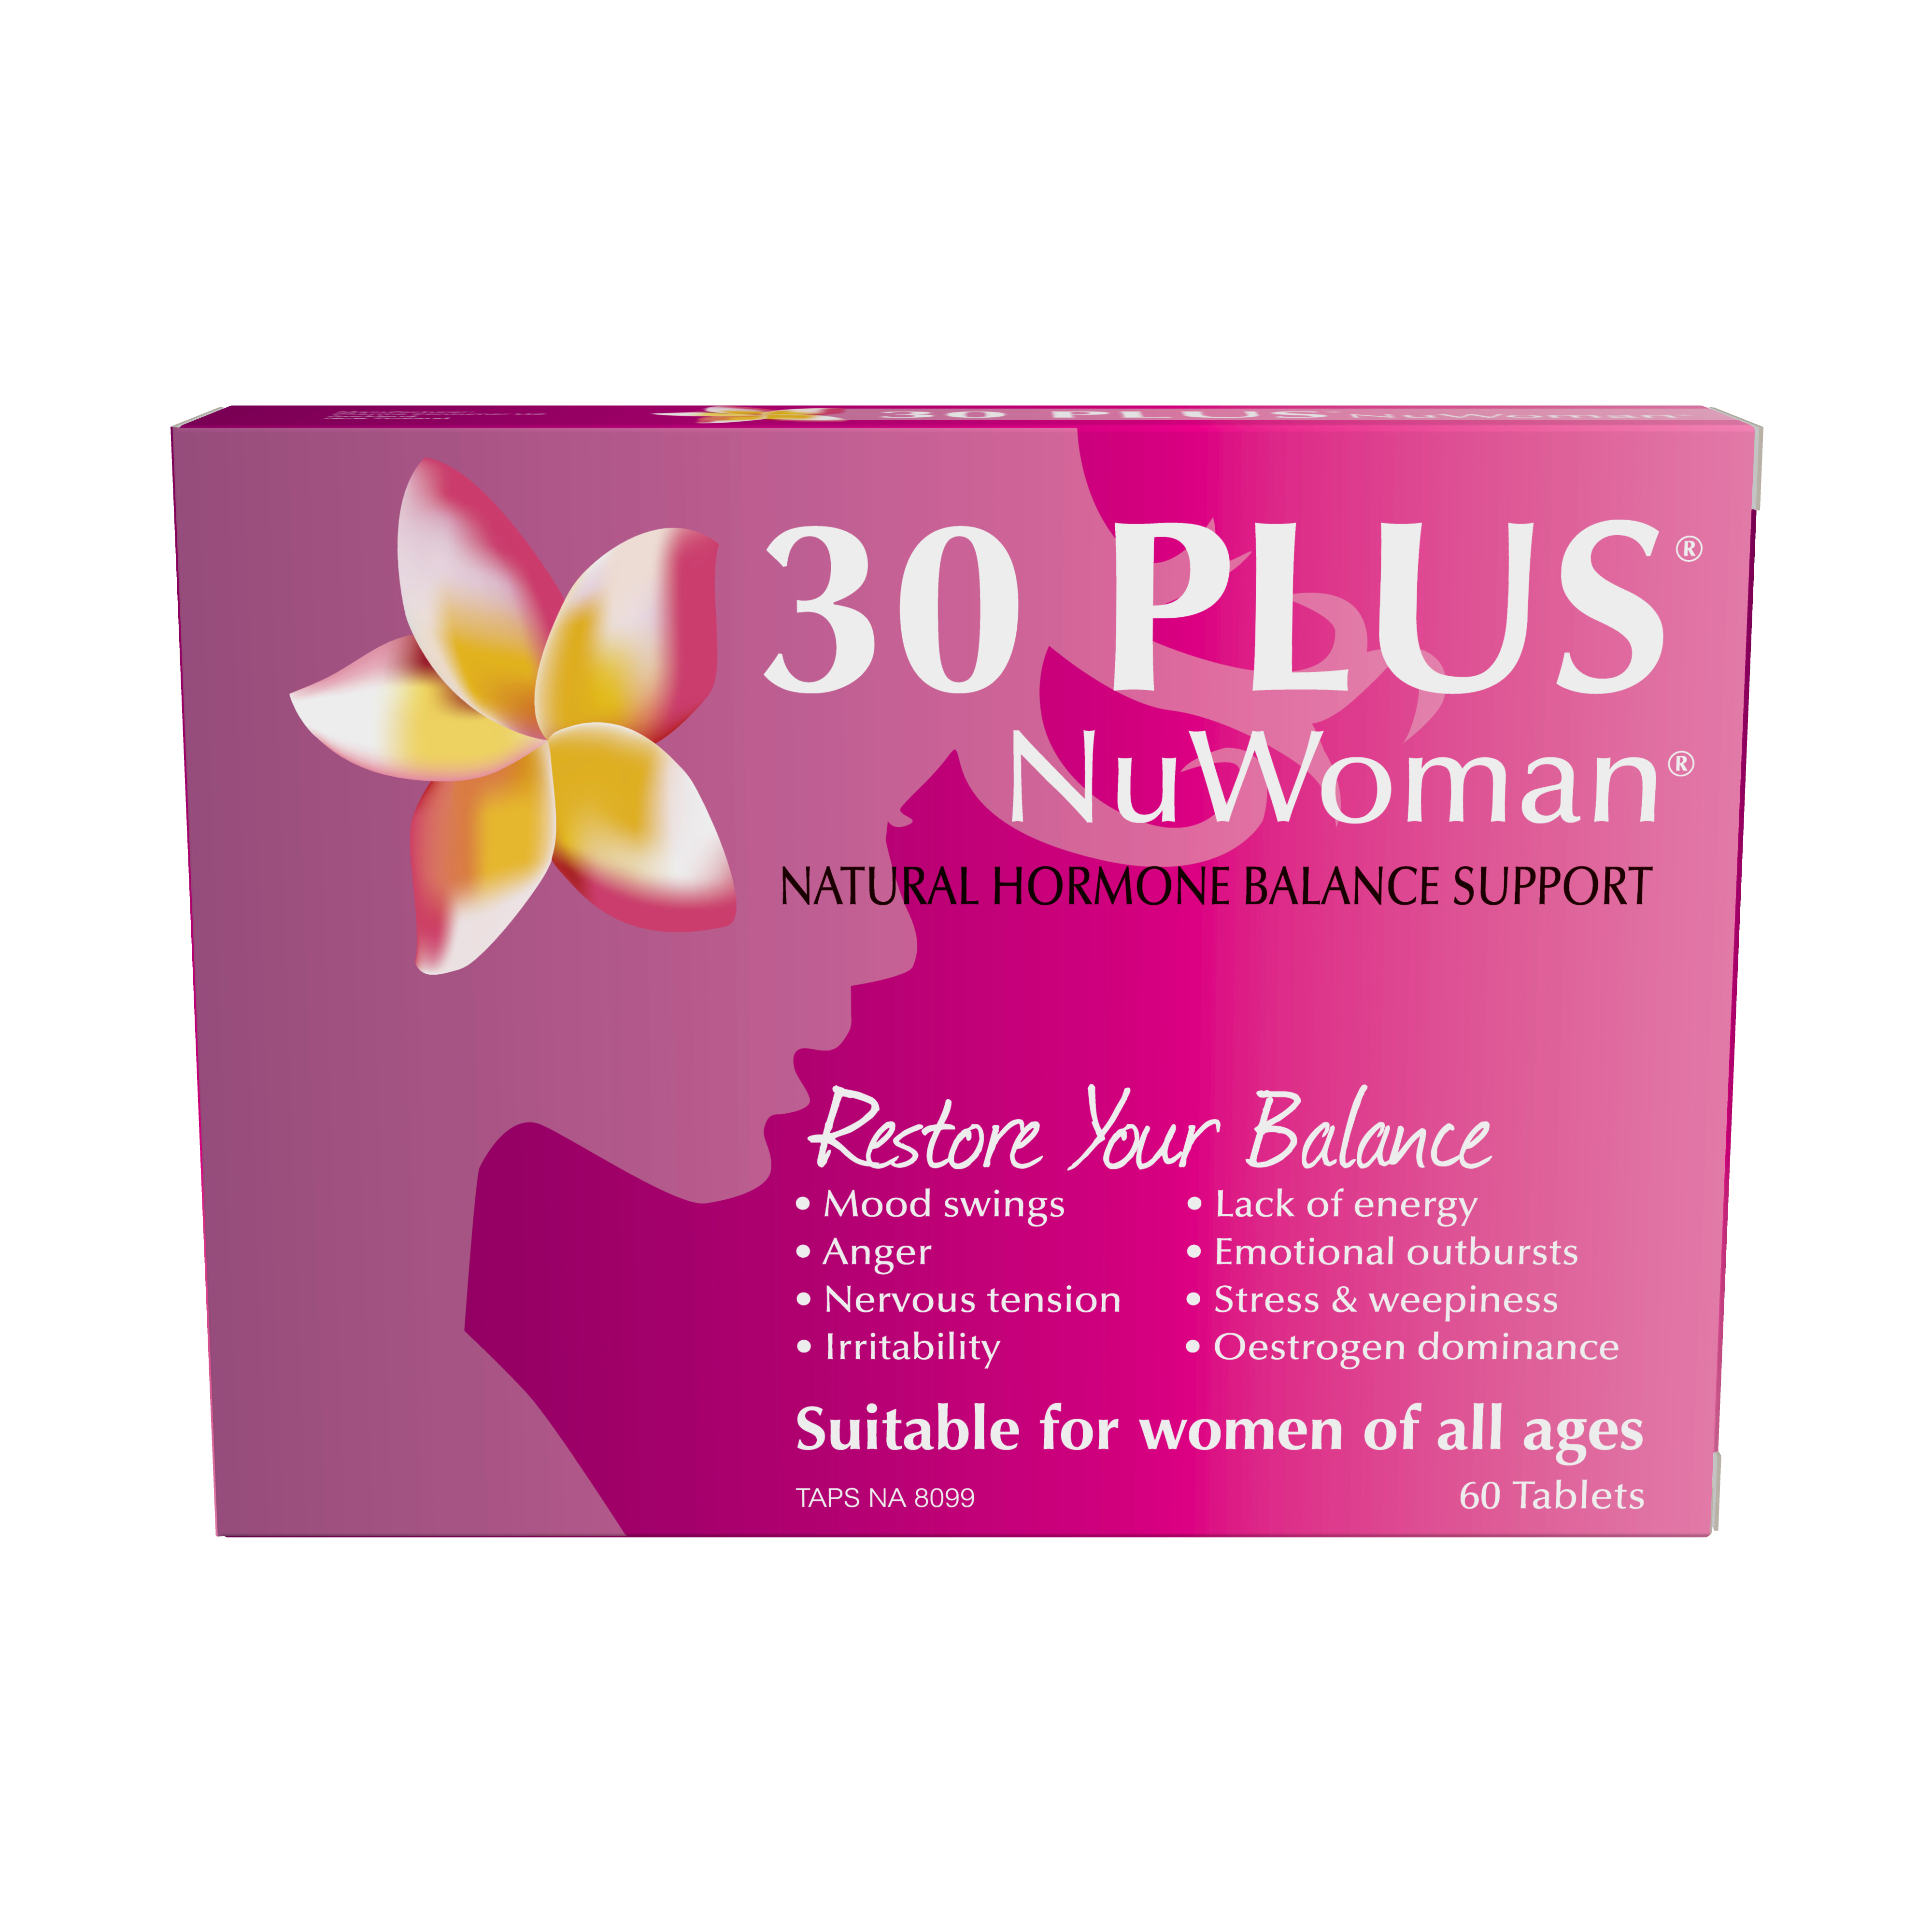 30 PLUS NuWoman Natural Hormone Balance Support 120 Tablets